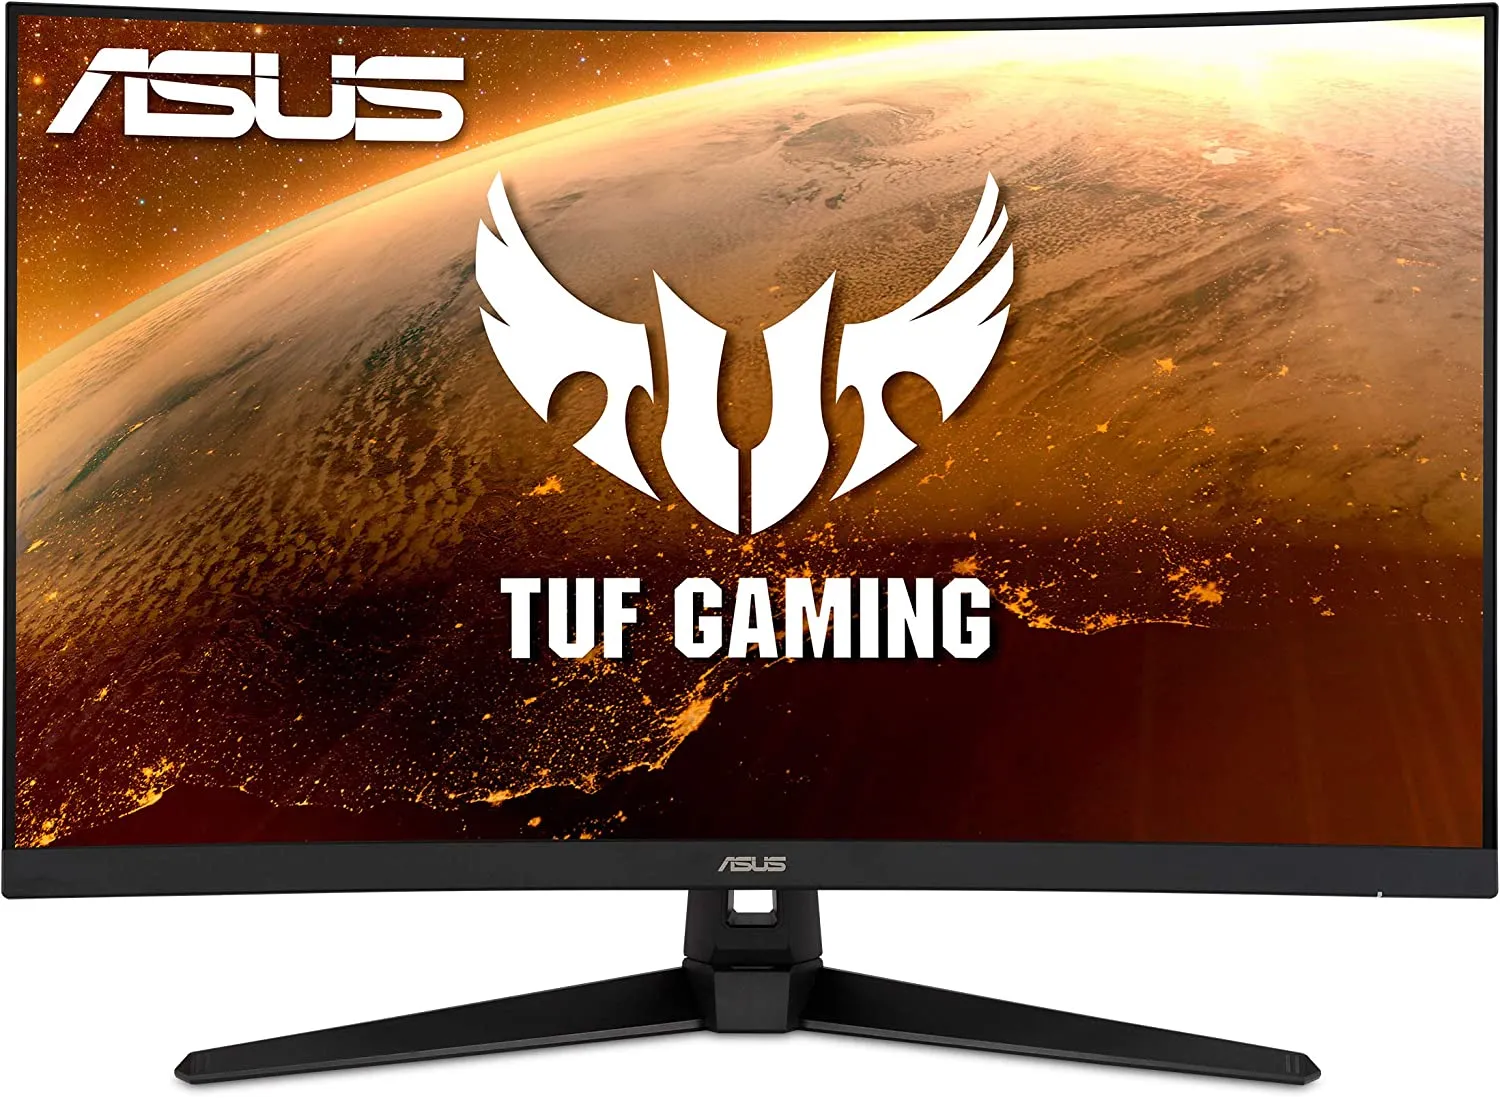 ASUS TUF Gaming 1440P HDR Curved Monitor